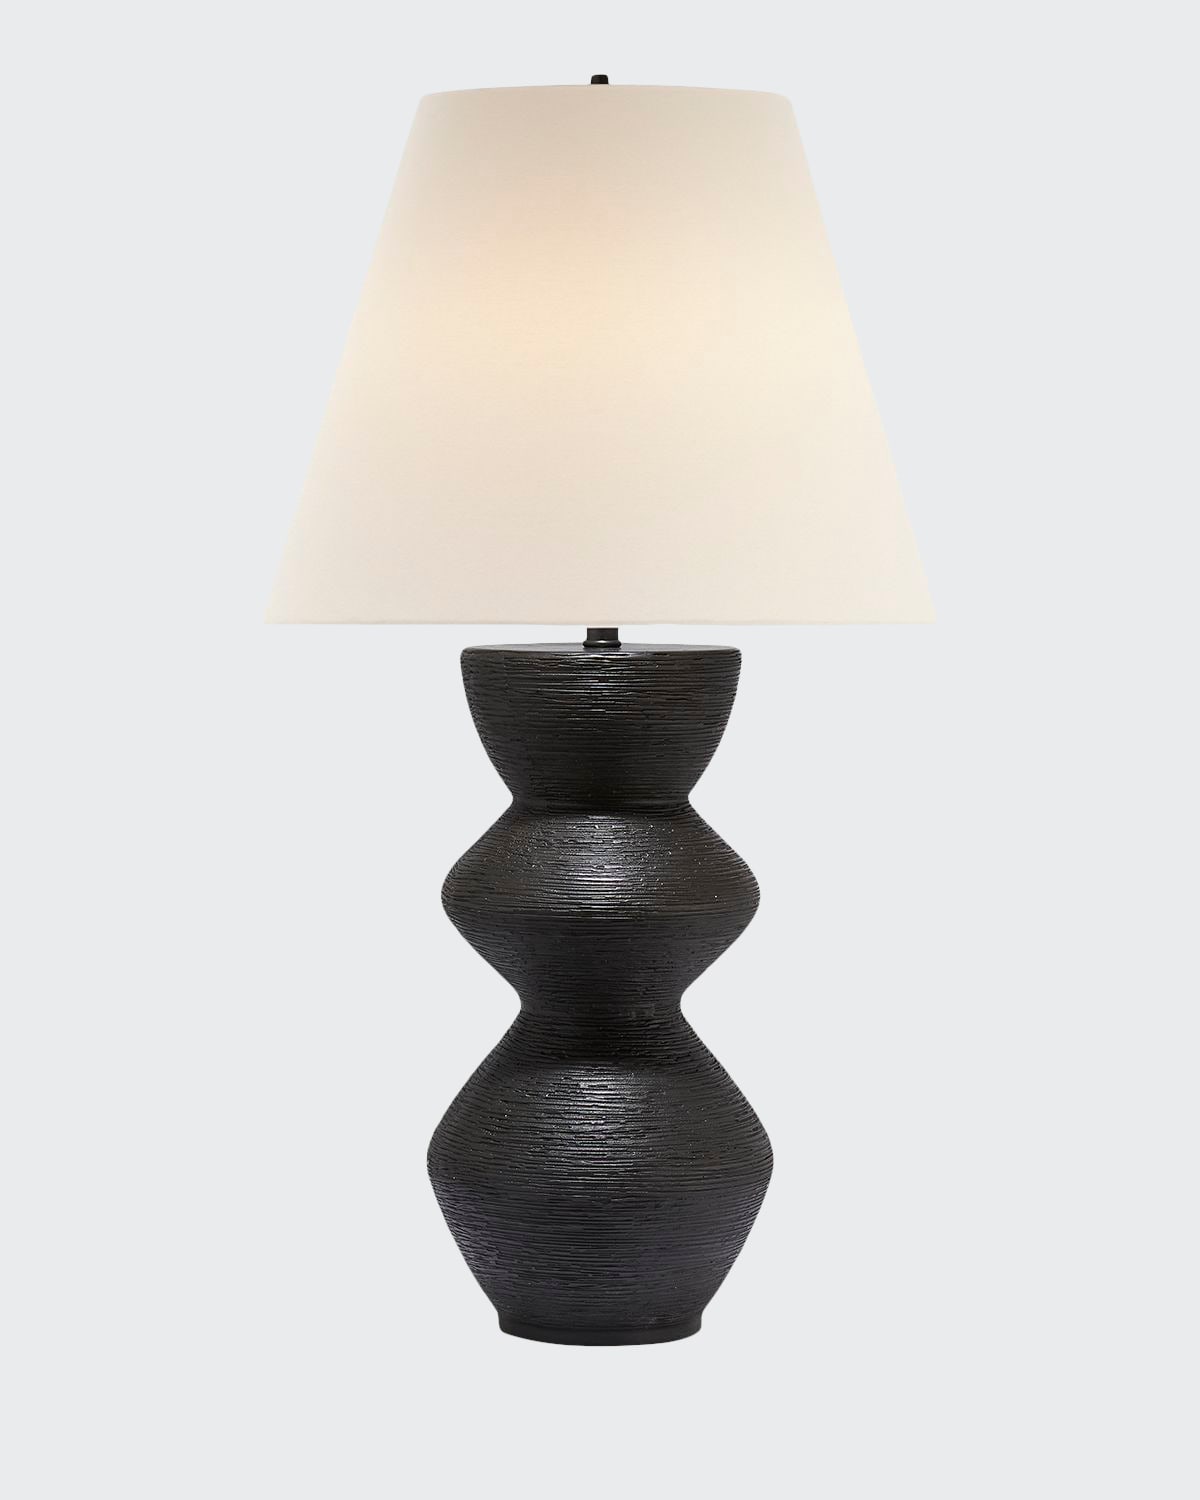 Kelly Wearstler For Visual Comfort Signature Utopia Table Lamp In Aged Iron